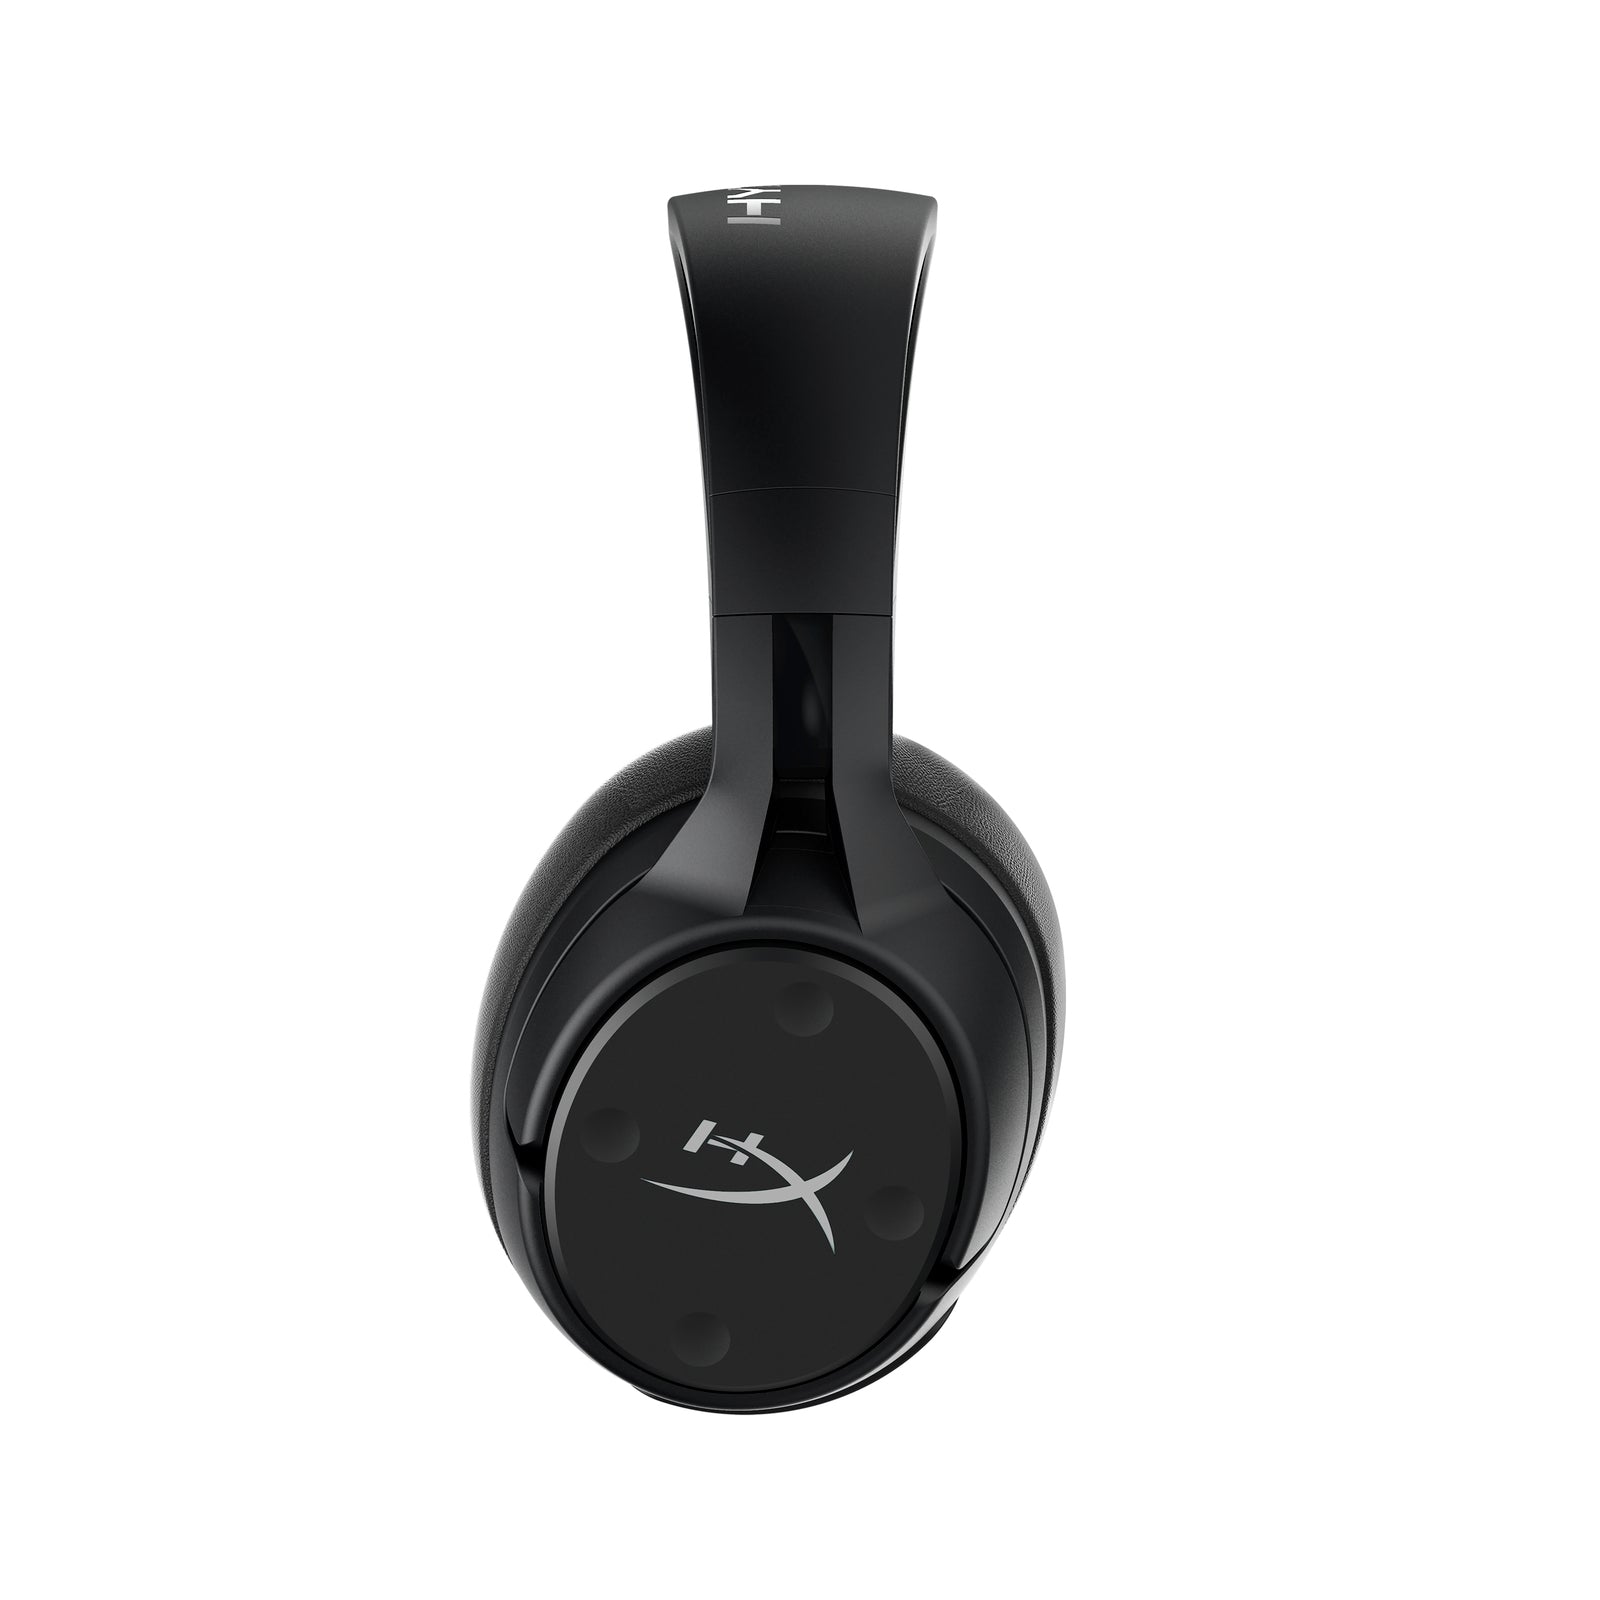 PS4 S Wireless ROW | Cloud HyperX – for Flight HyperX – and Headset PC USB